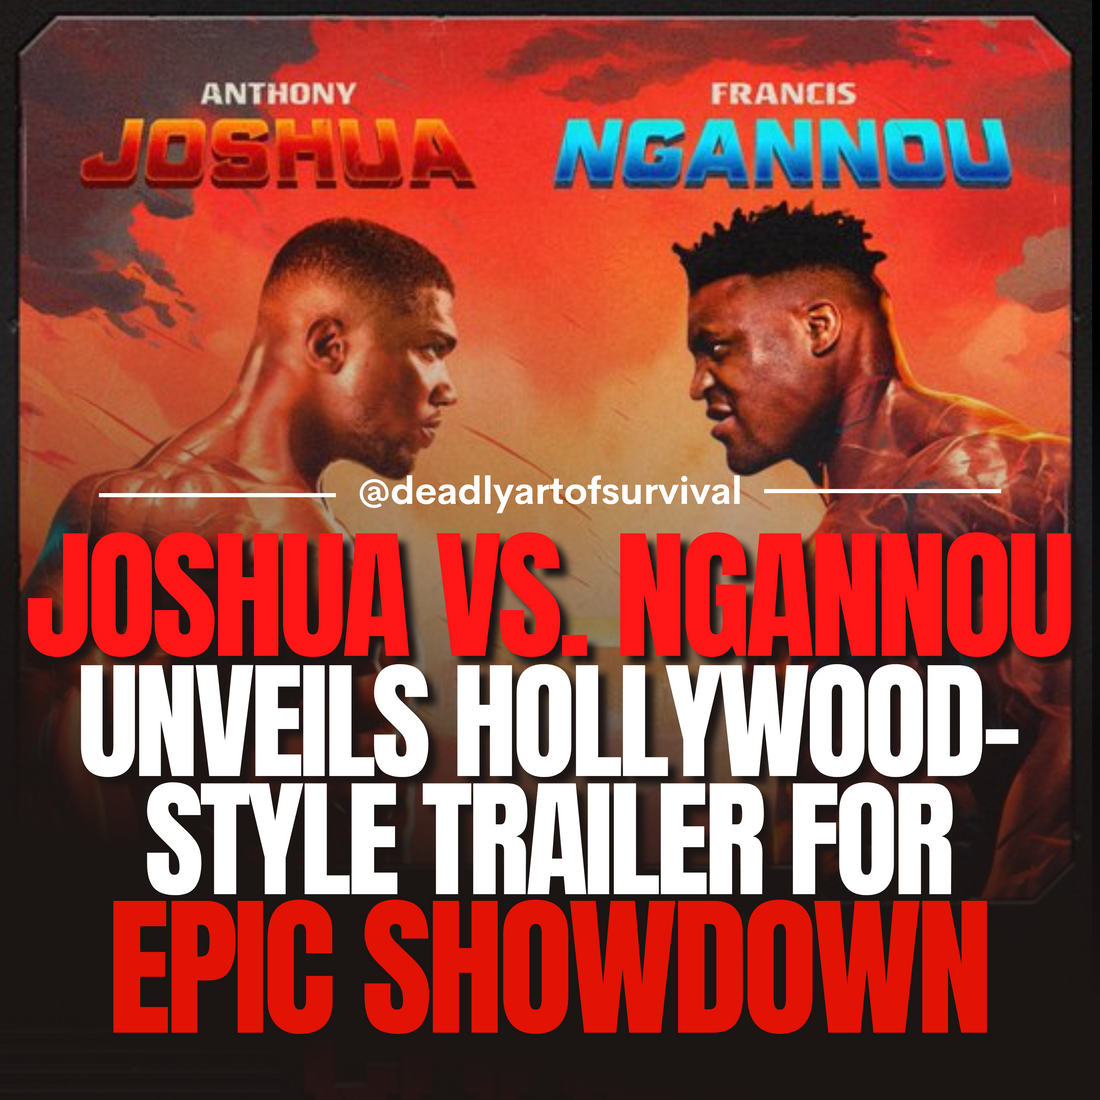 Joshua-vs.-Ngannou-Boxing-Match-Gets-Hollywood-Treatment-Action-Packed-Trailer-Released deadlyartofsurvival.com